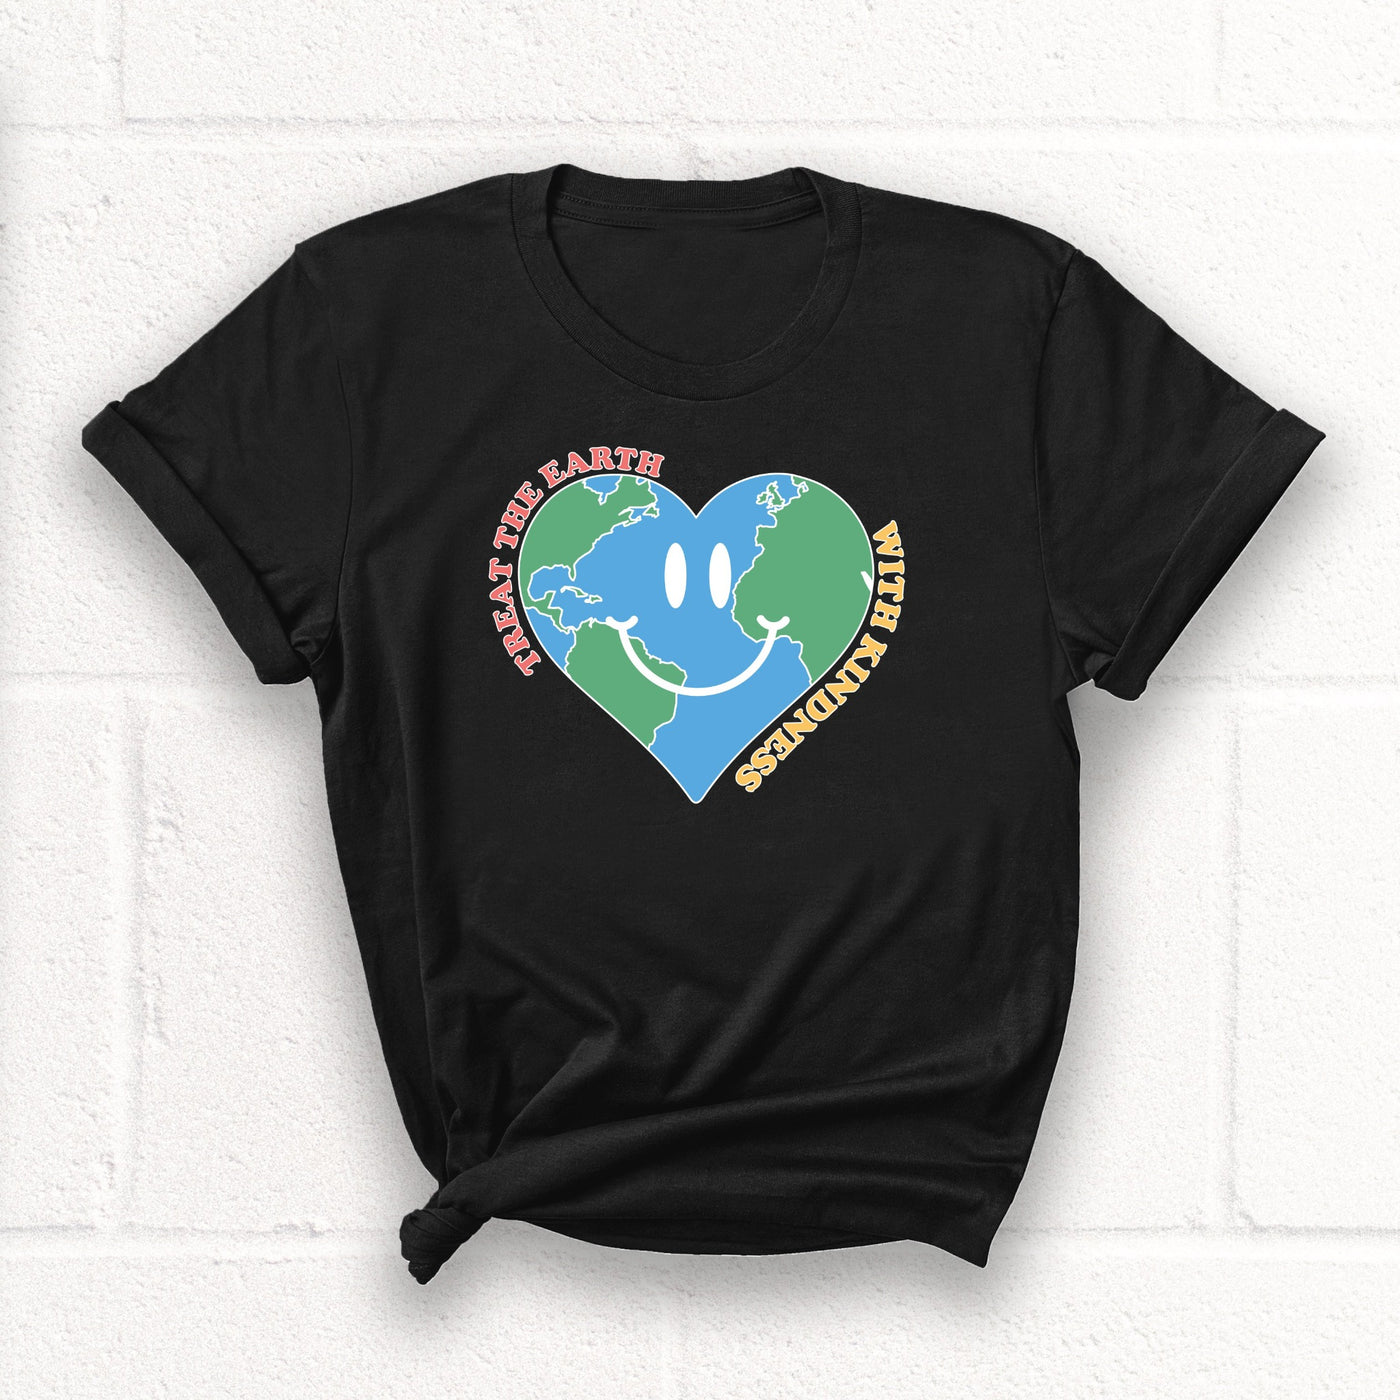 Treat the Earth with Kindness T-Shirt